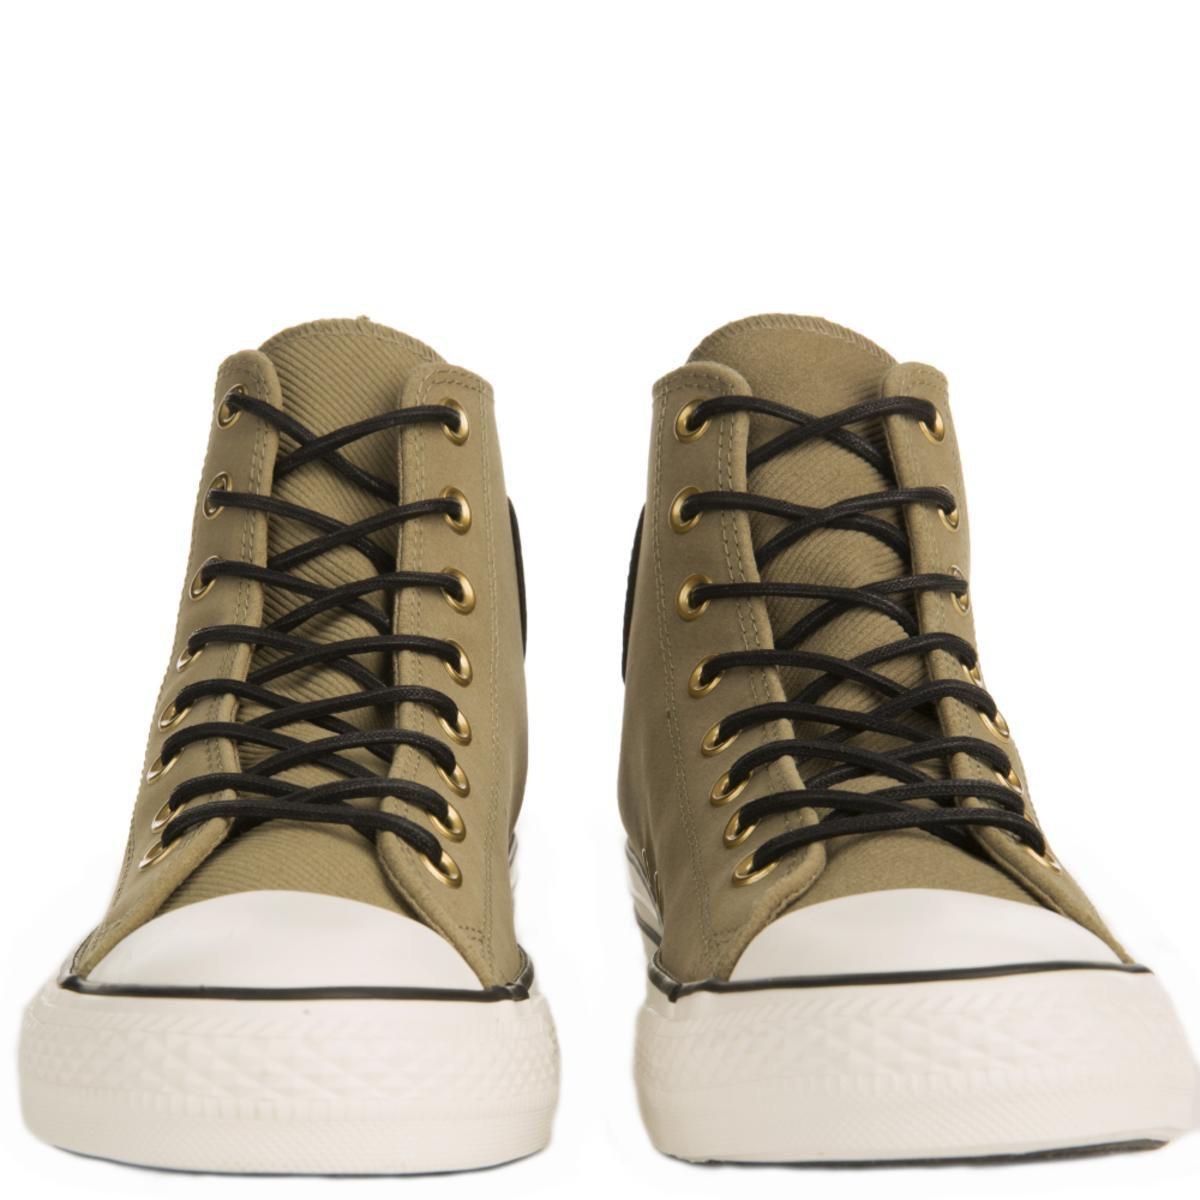 buy \u003e converse chuck taylor all star crafted suede high top, Up to 75% OFF